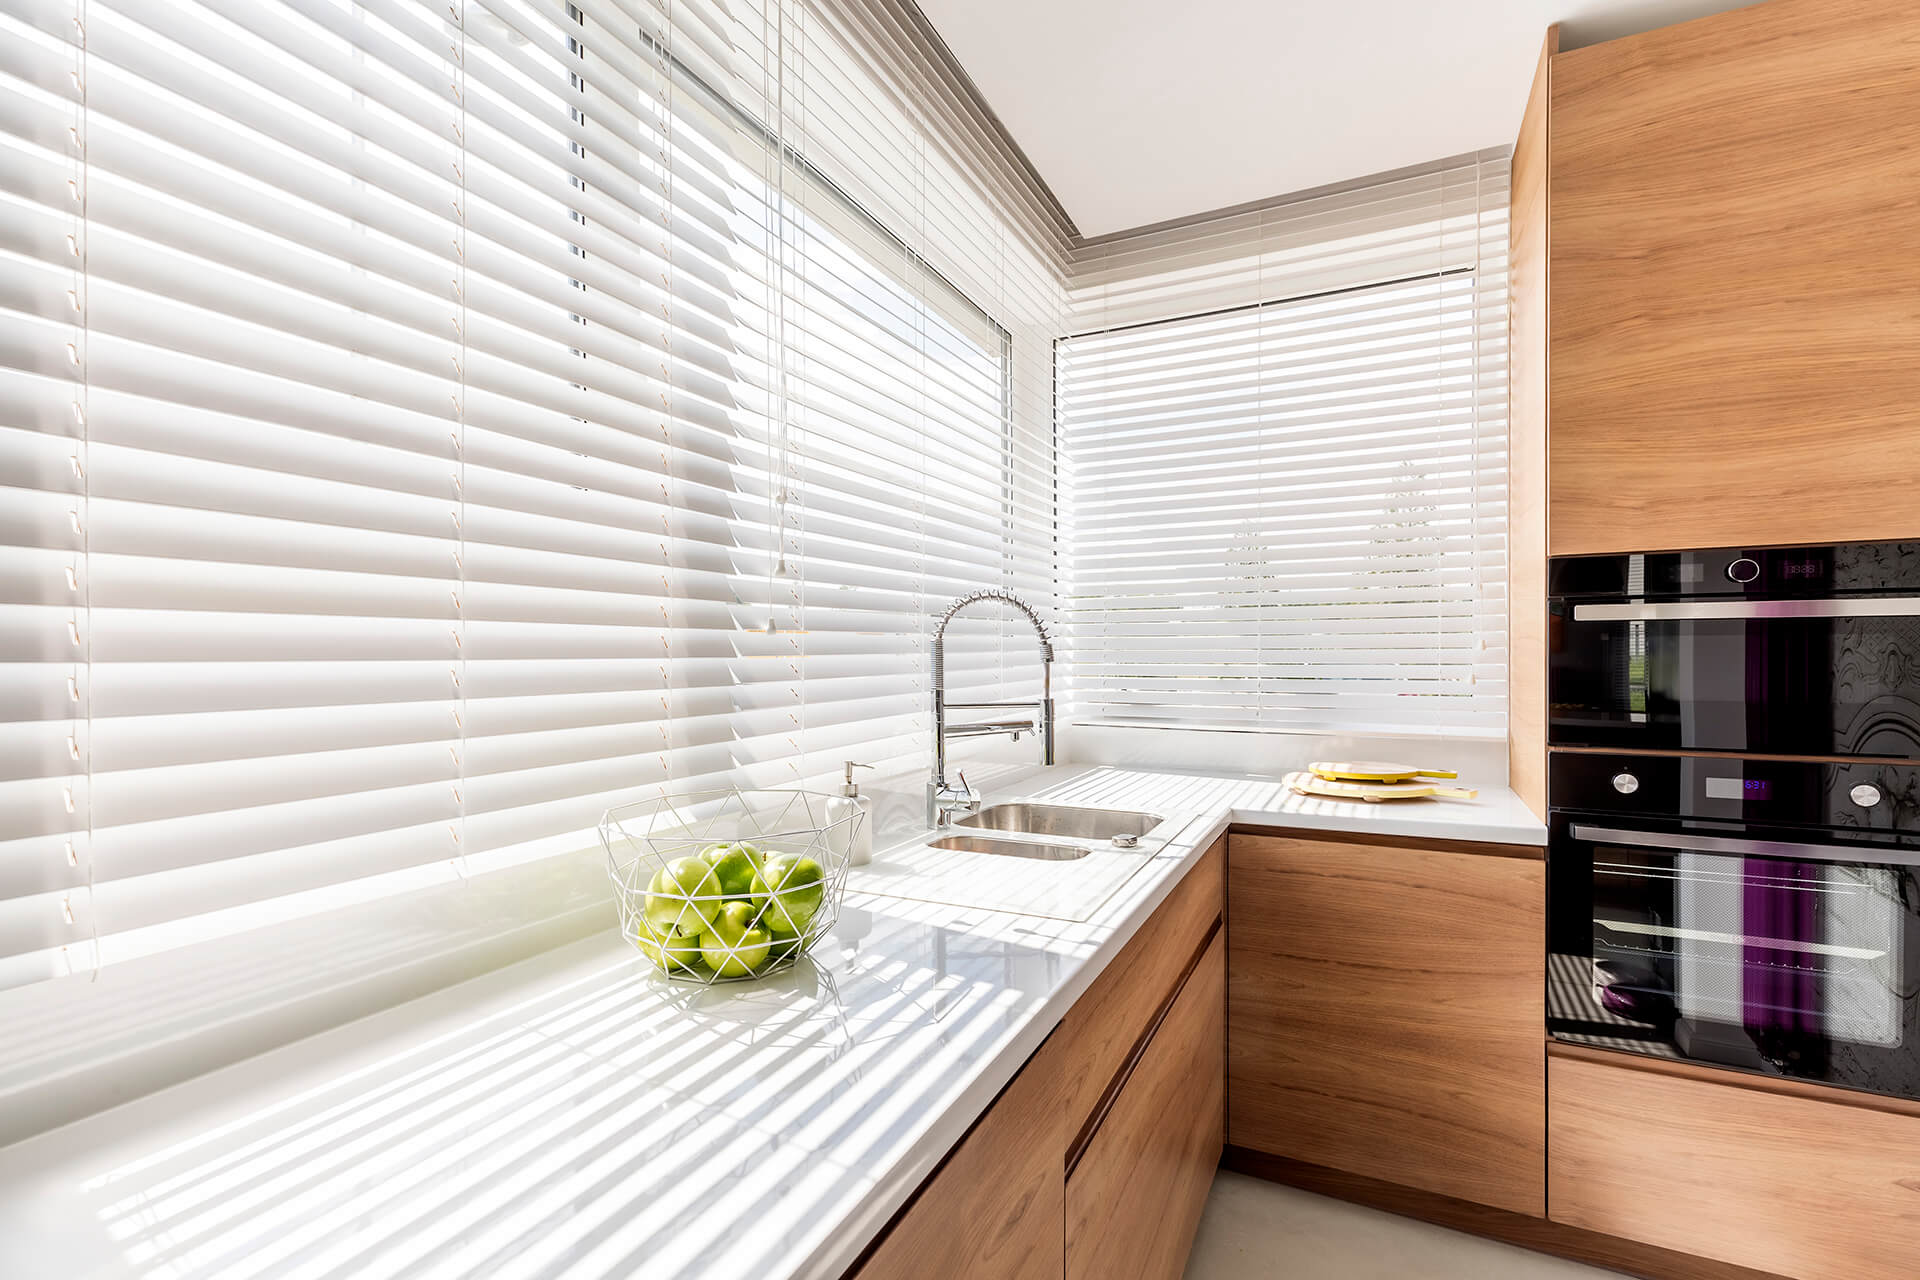 Clean white and wooden kitchen with half open blinds.